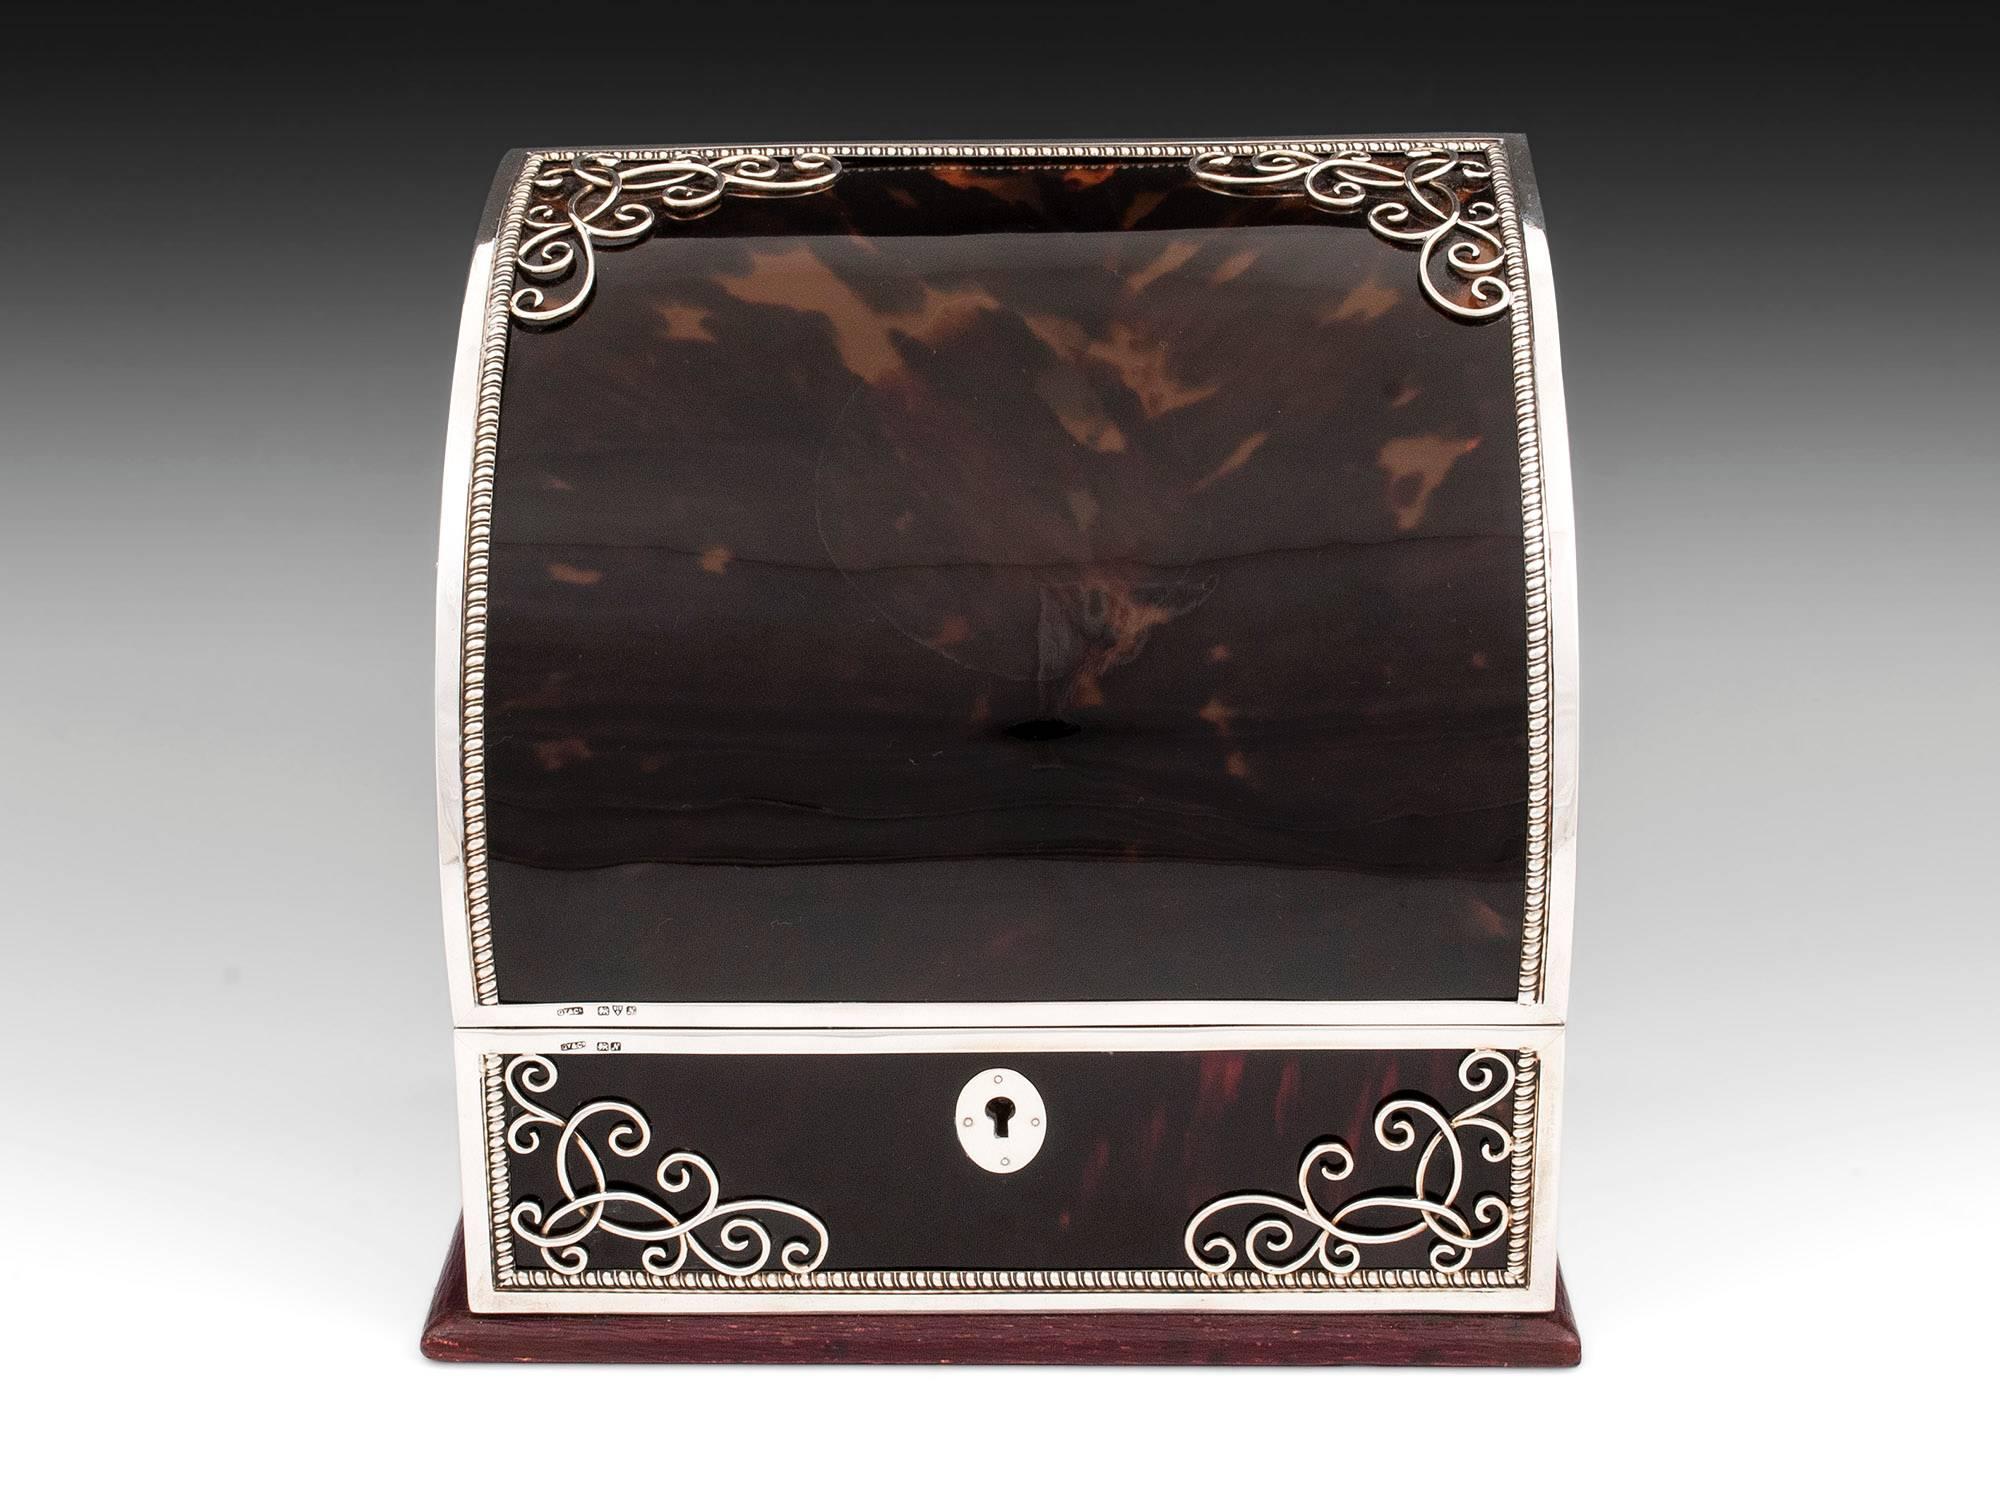 Tortoiseshell and sterling silver stationery box and blotter by Chester Silversmith Grey & Co. Both have wonderful decorative scrolling sterling silver in the corners. 

The interior of the stationery box features several compartments lined with